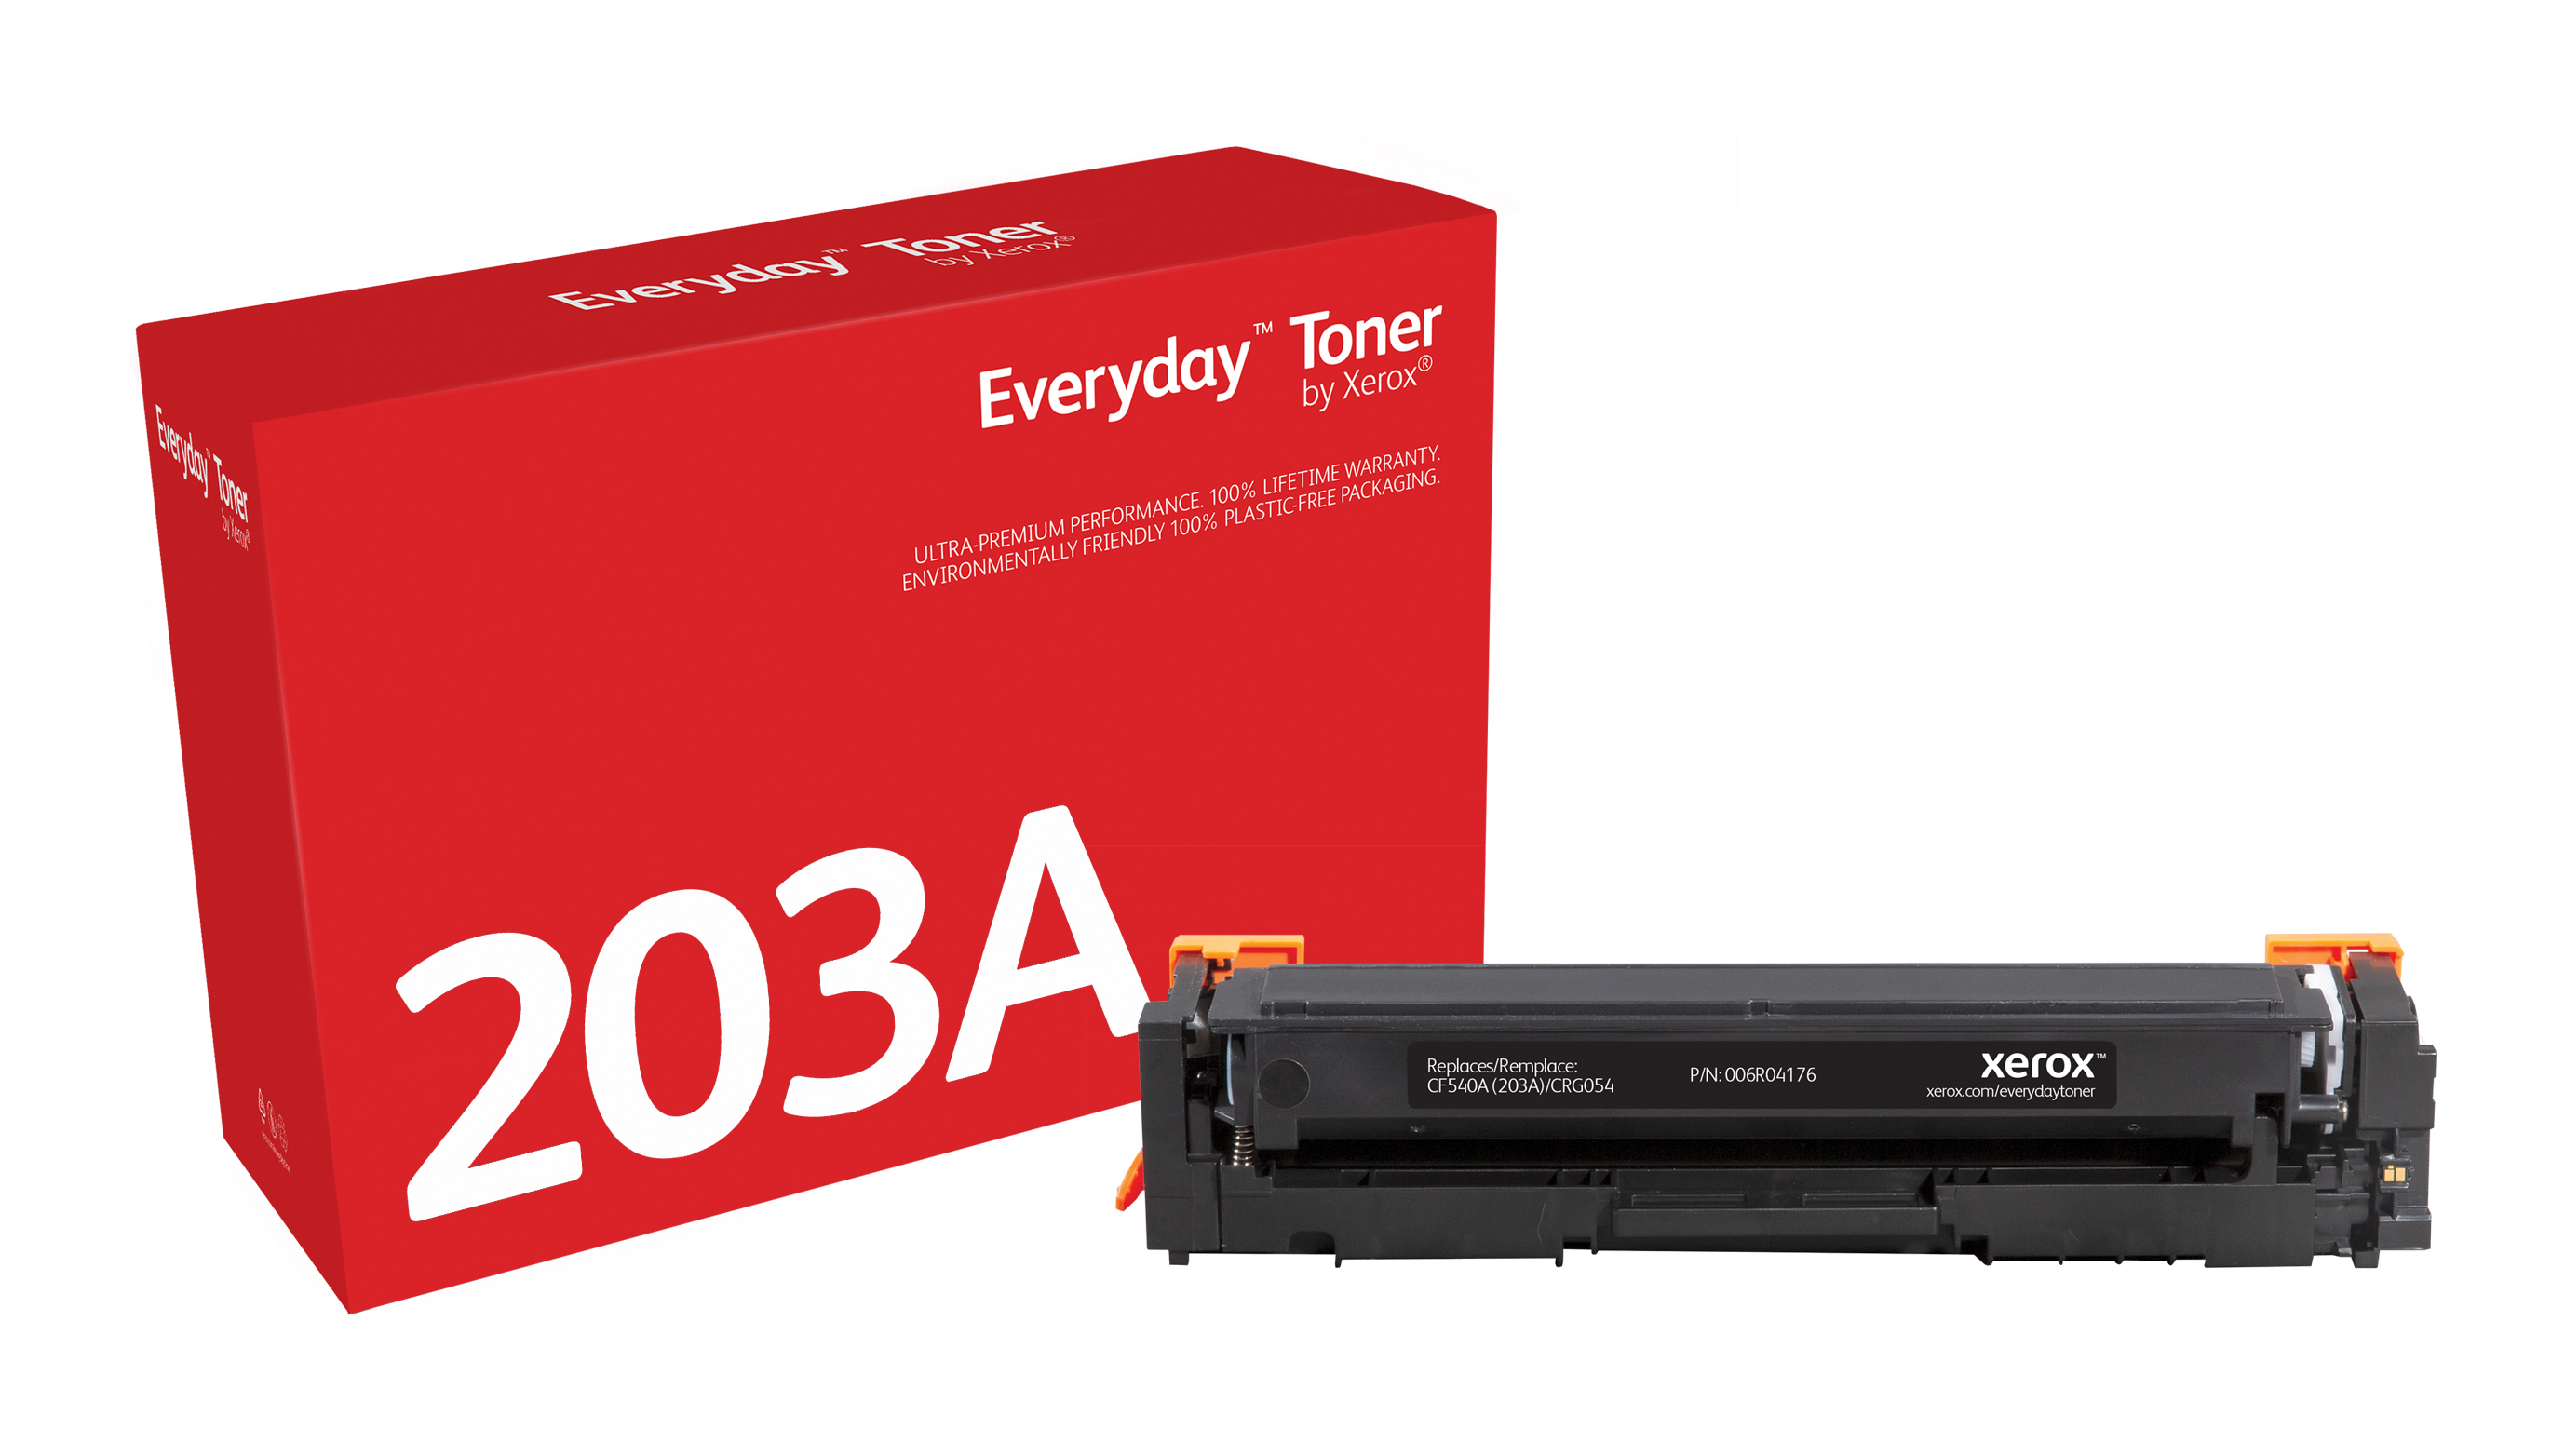 Everyday™ Black Toner by Xerox compatible with HP 202A (CF540A/CRG-054BK),  Standard Yield 006R04176 Genuine Xerox Supplies